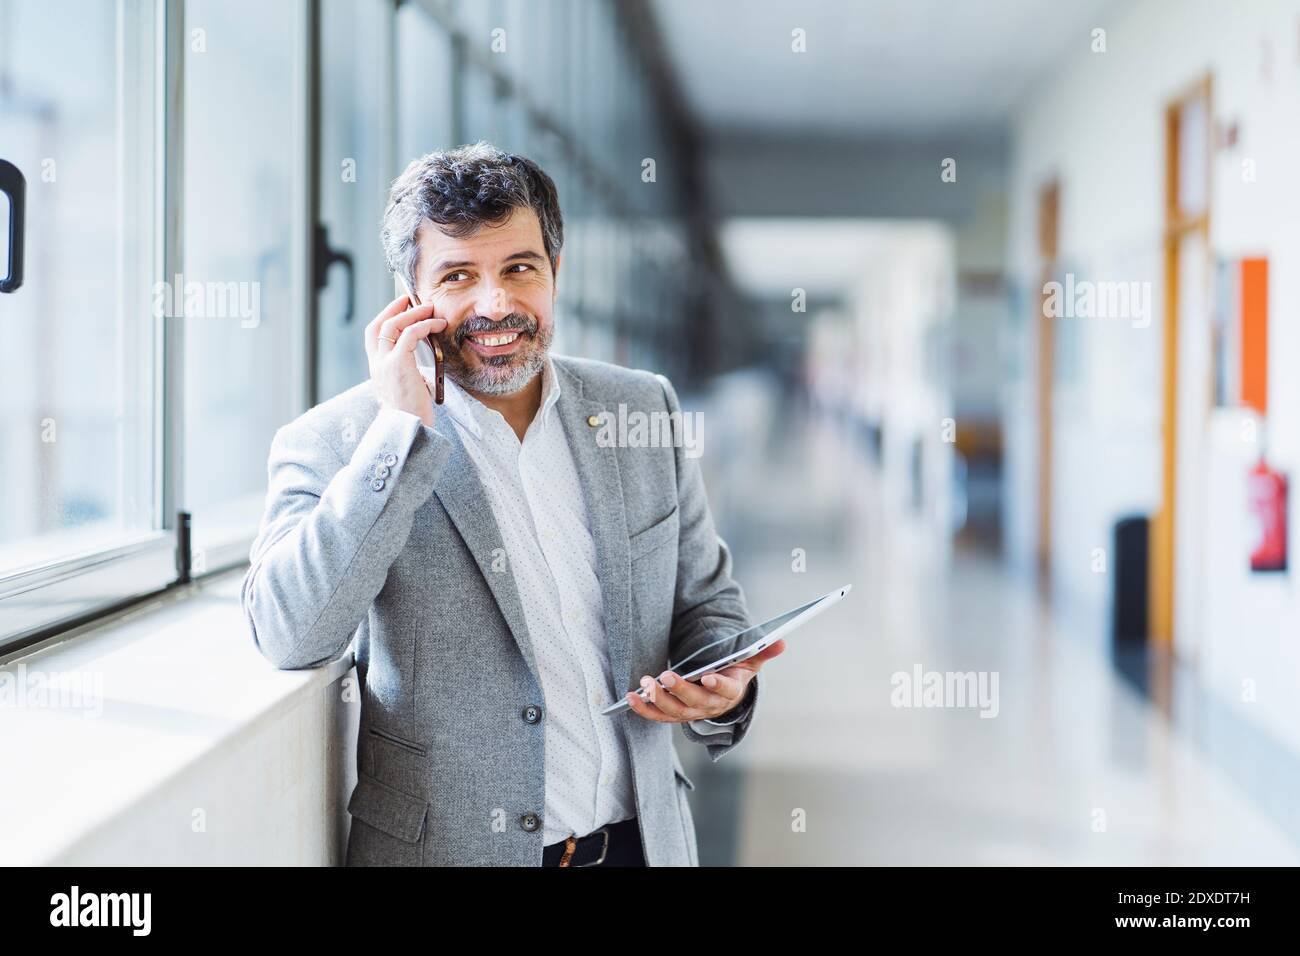 Smiling professor looking away while answering phone in corridor at university Stock Photo